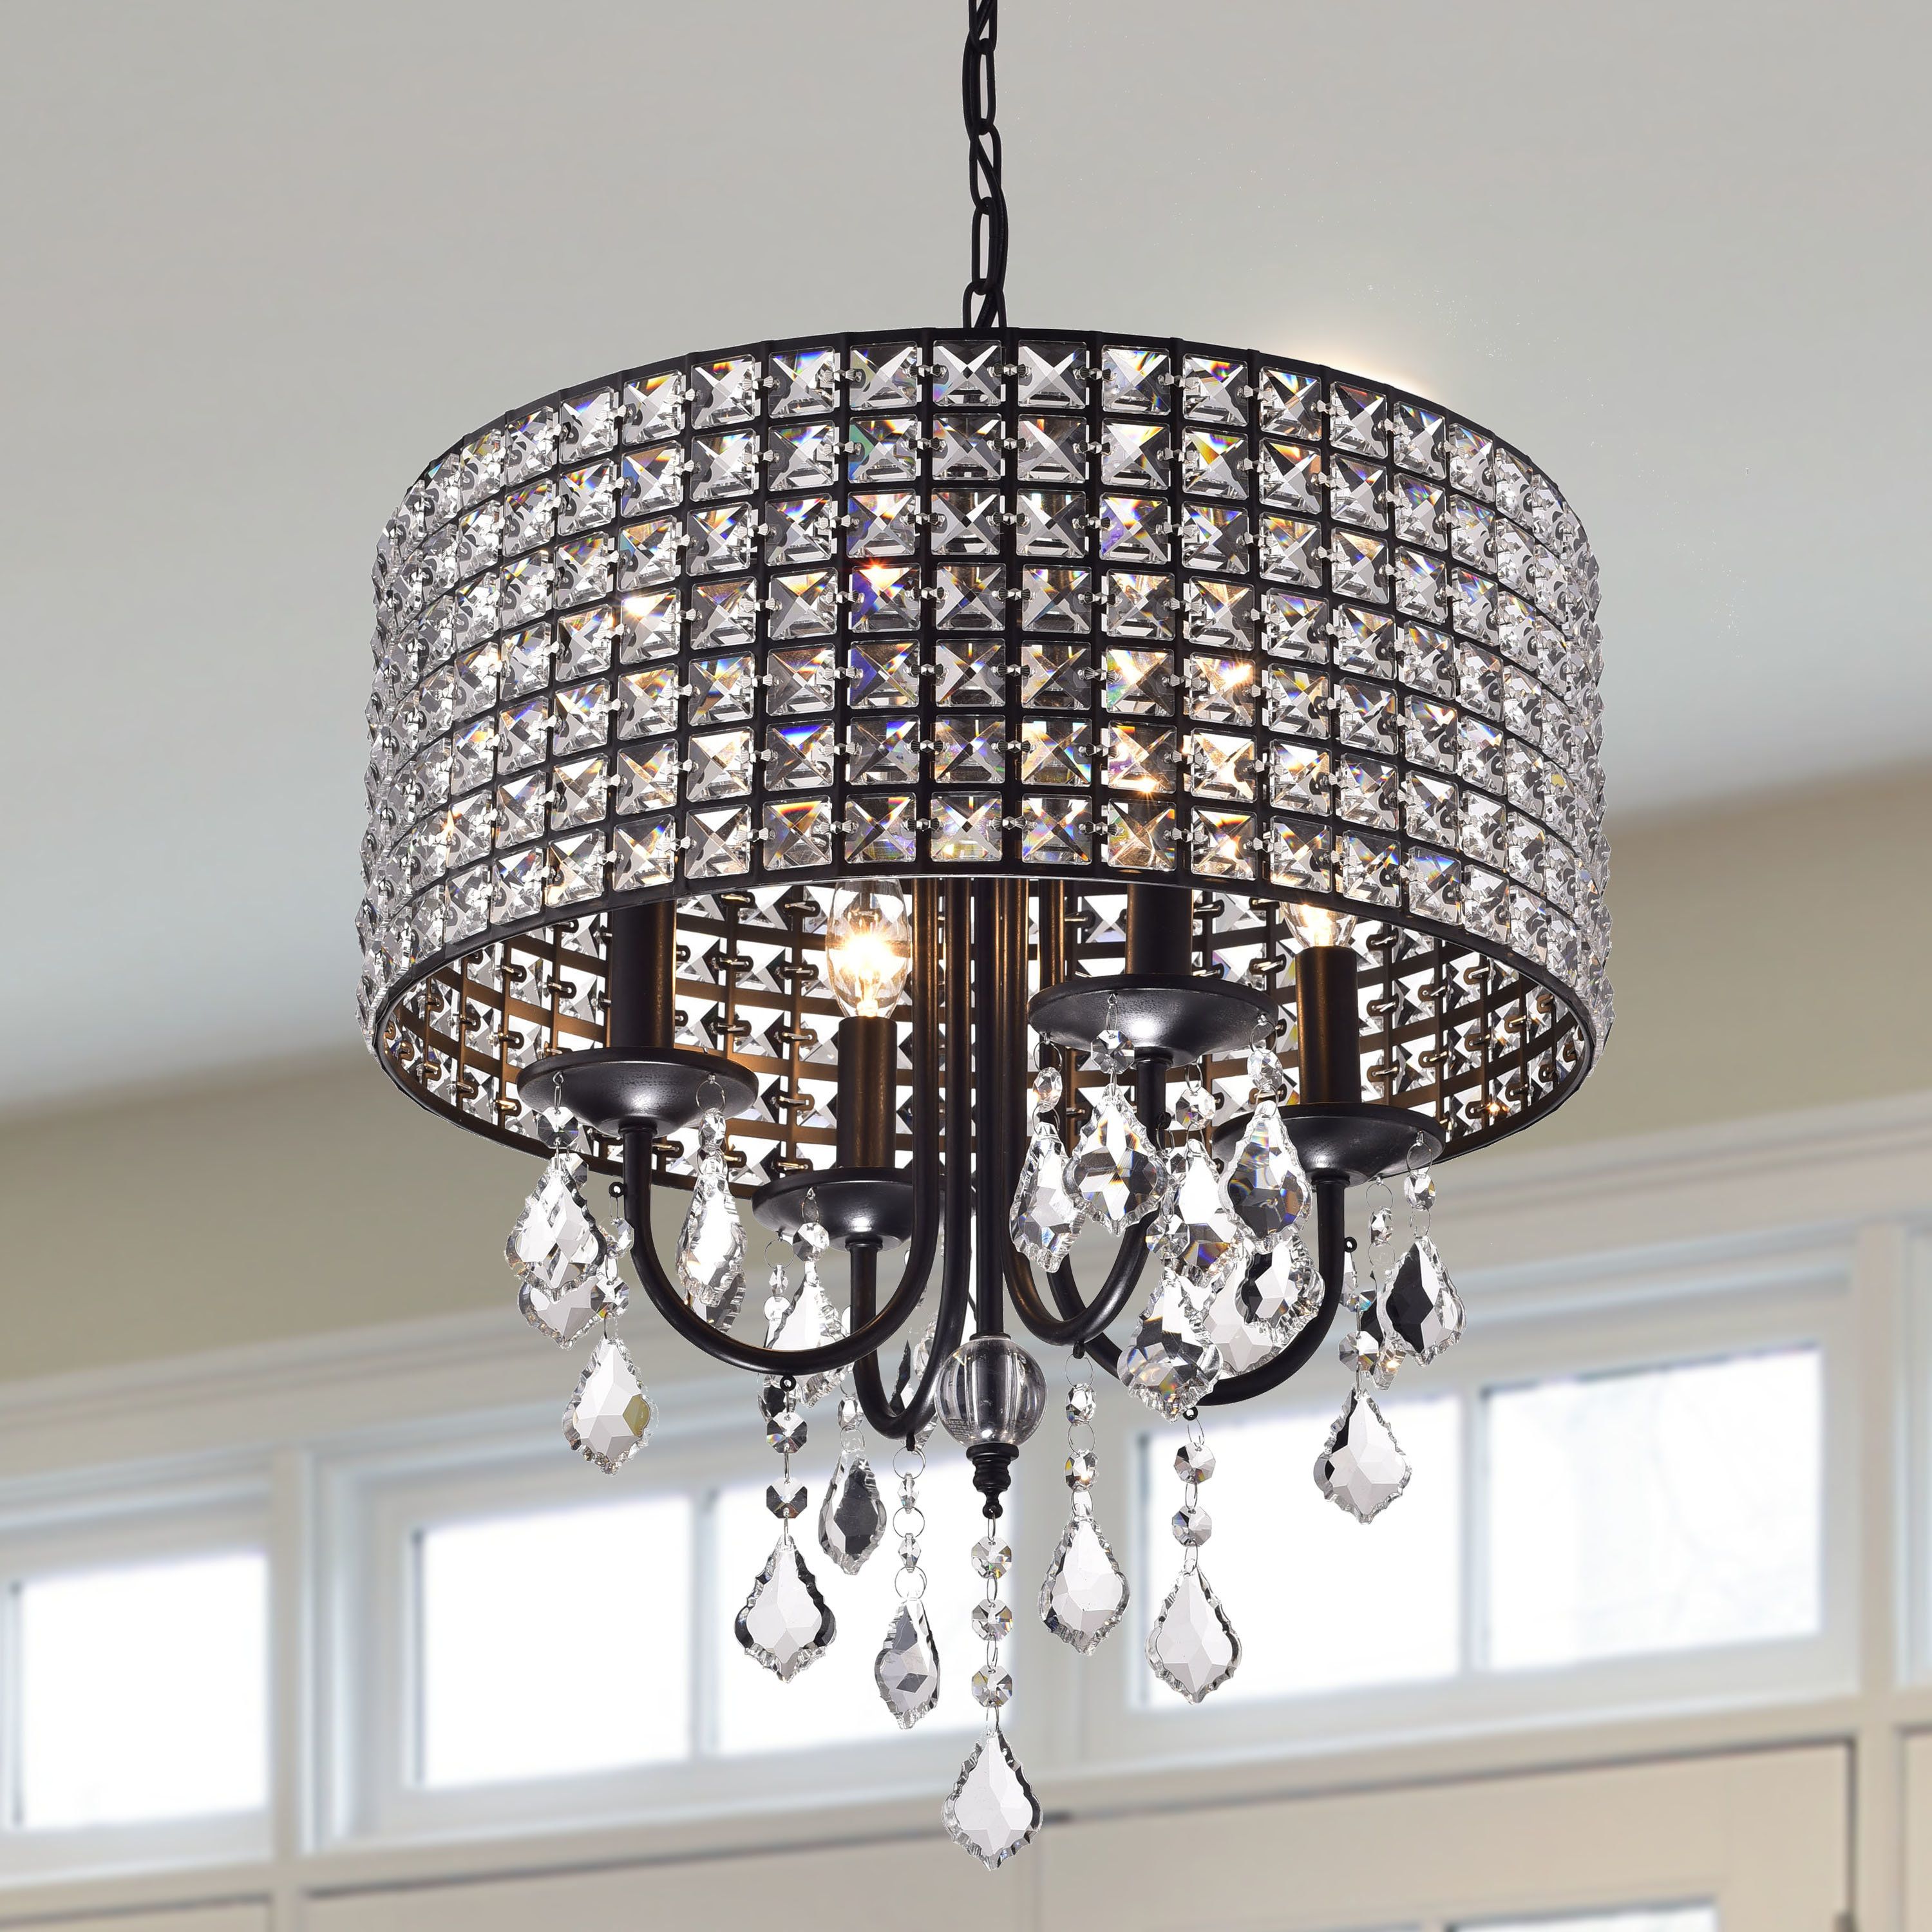 Albano 4 Light Crystal Chandelier Pertaining To Albano 4 Light Crystal Chandeliers (Photo 1 of 30)